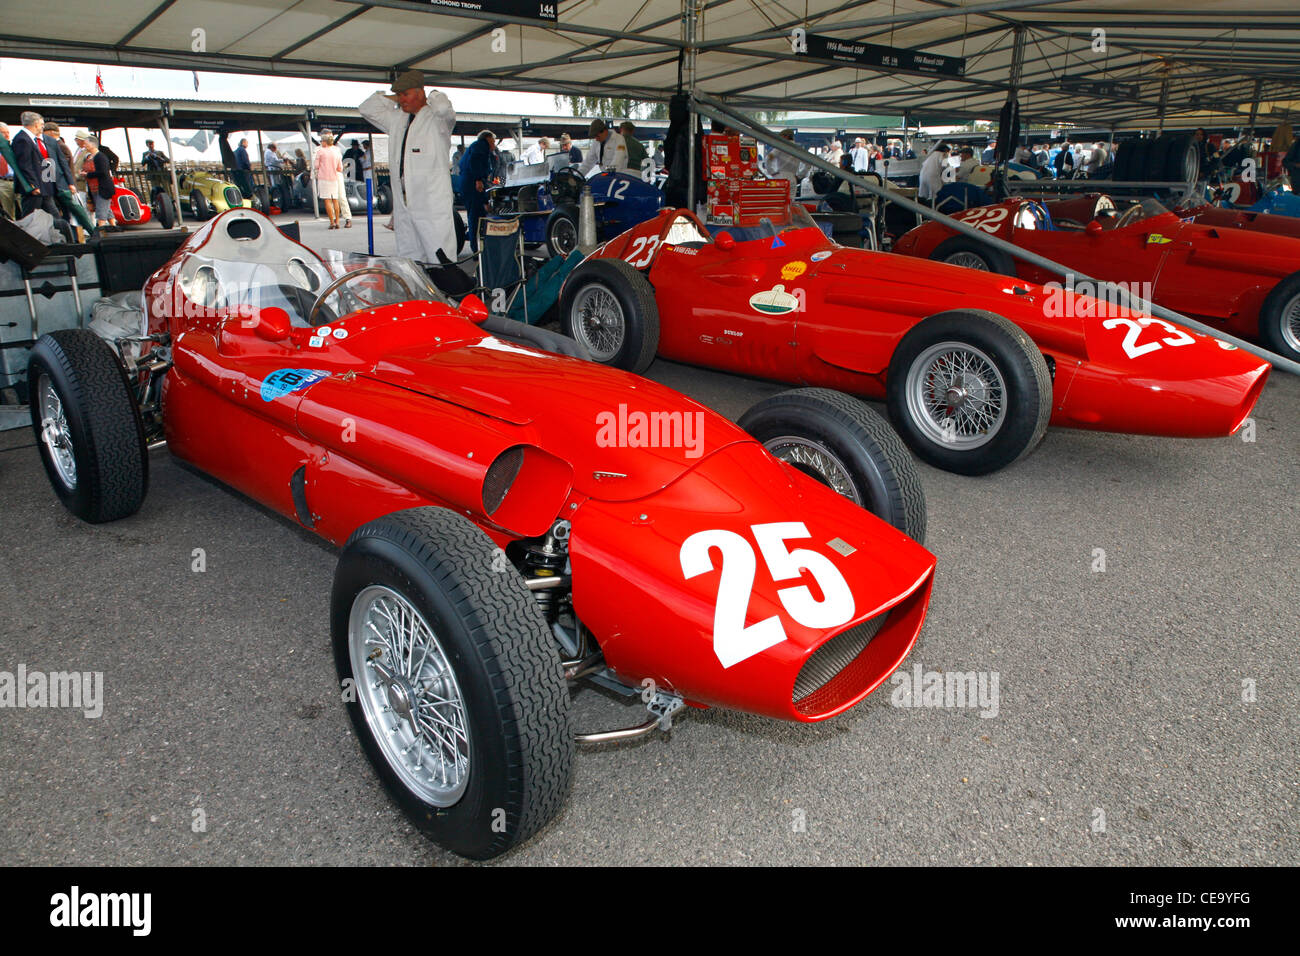 1959 Tecnica Meccanica Maserati 250F and 1957 Maserati 250F in the paddock at the 2011 Goodwood Revival, Sussex, UK. Stock Photo